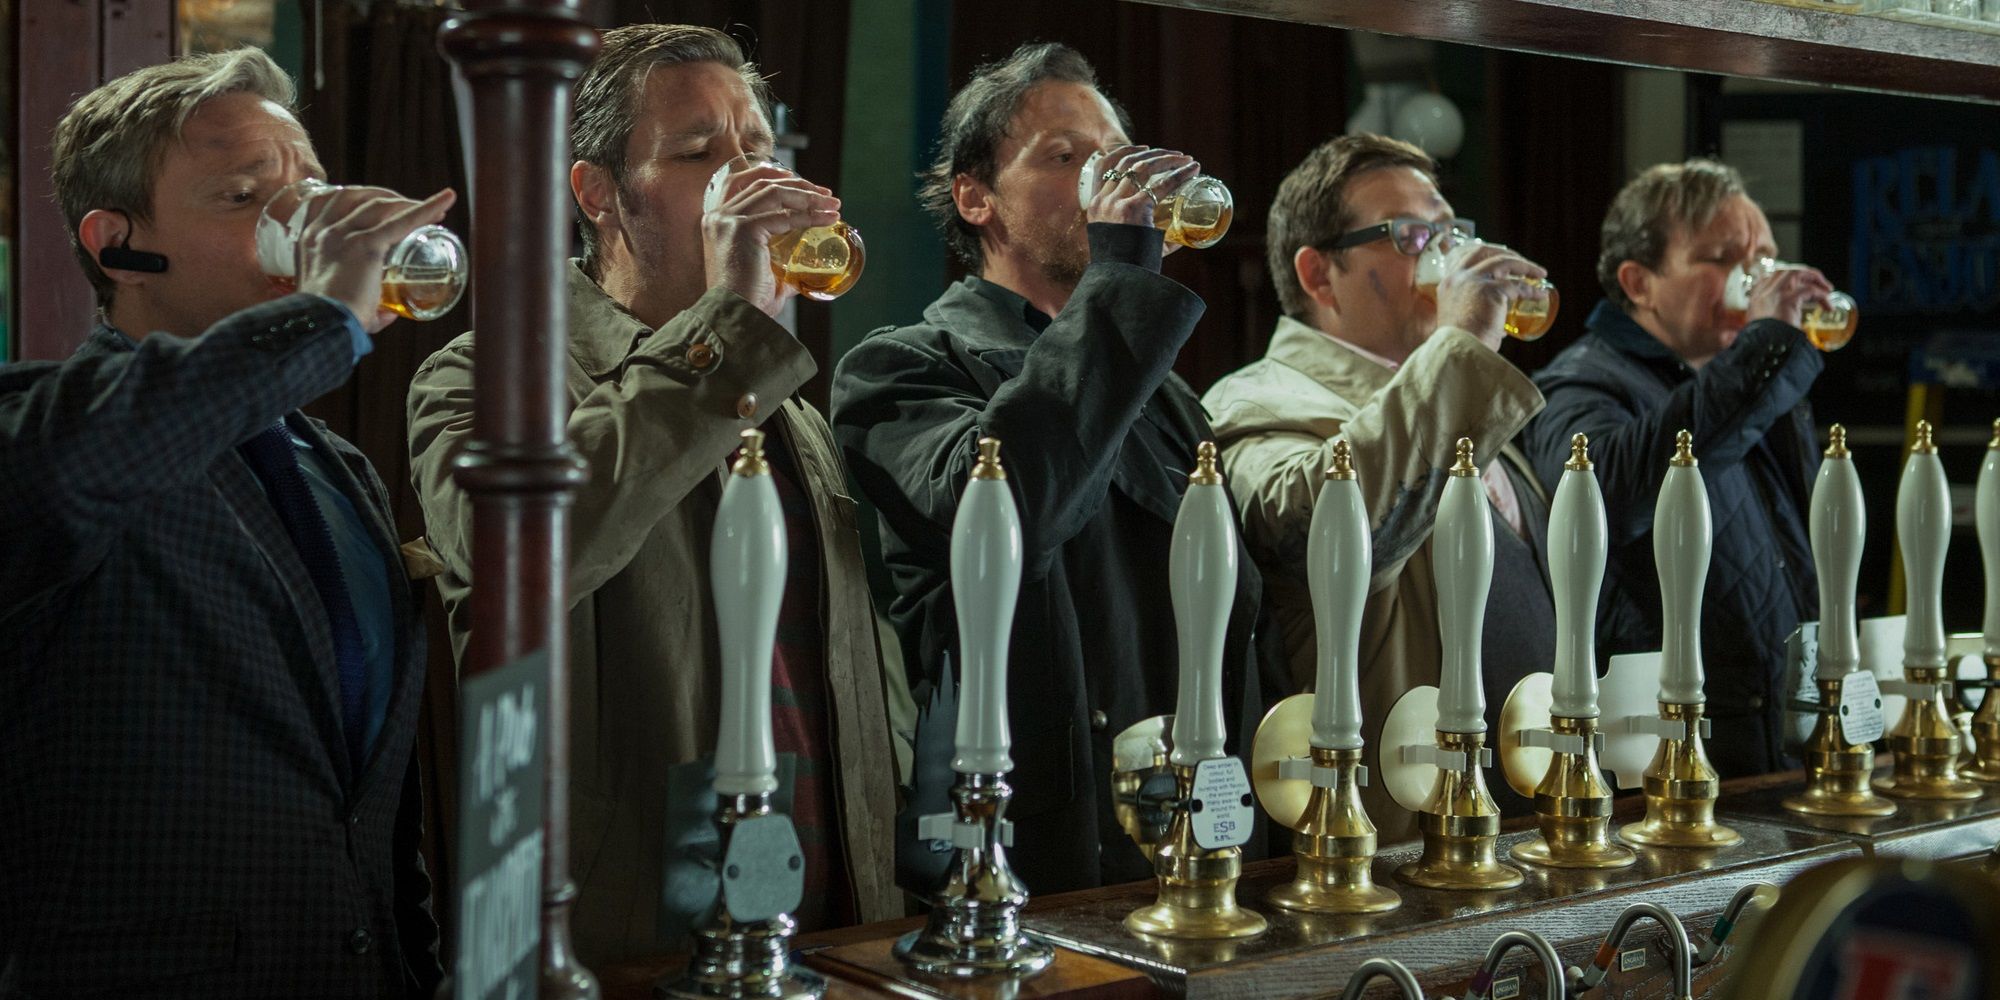 Gary and his friends drinking in The World's End